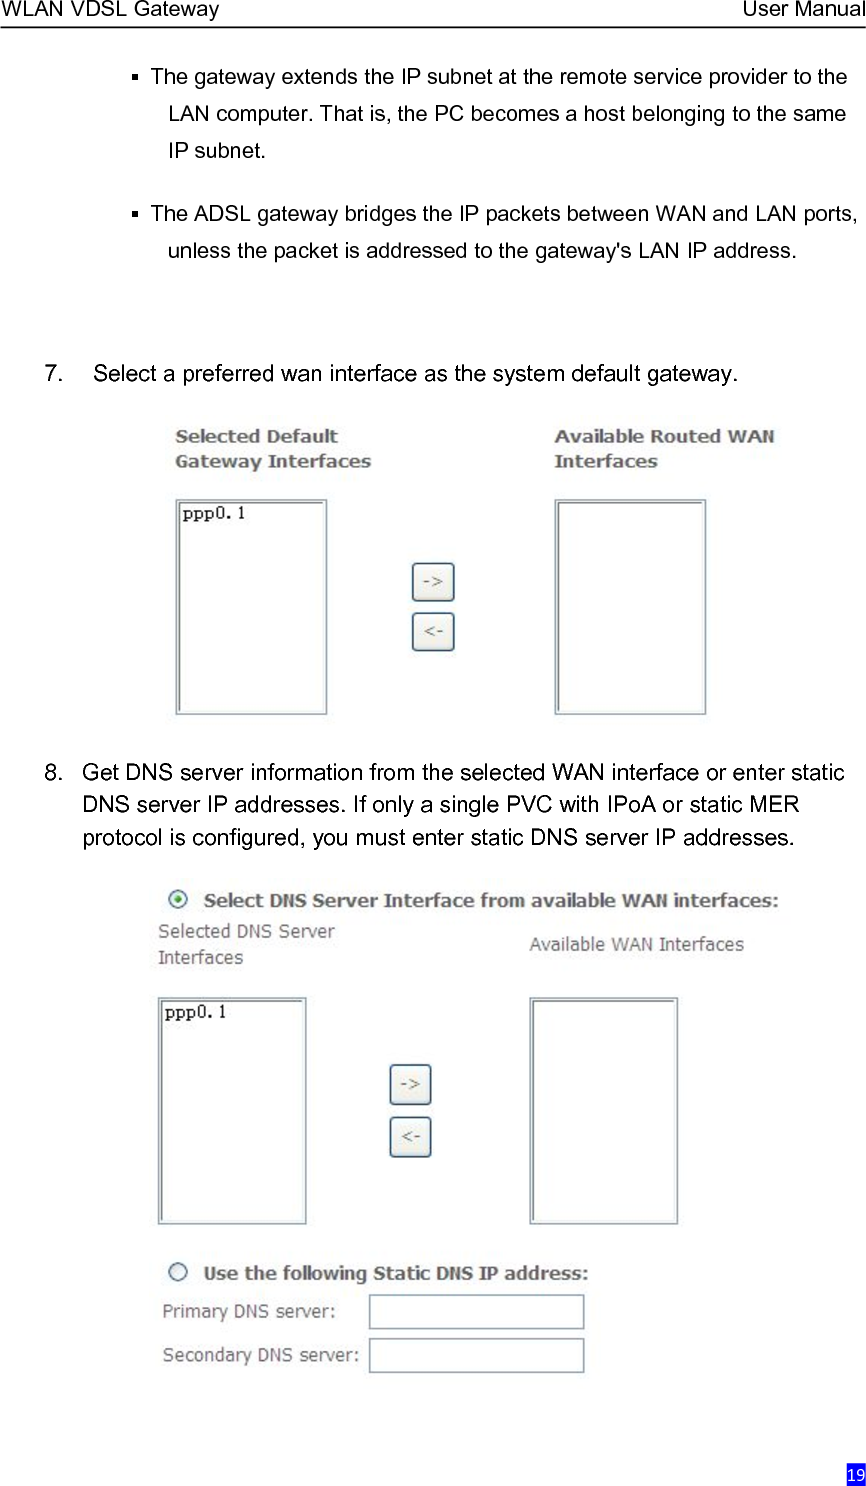 WLAN VDSL Gateway User Manual19The gateway extends the IP subnet at the remote service provider to theLAN computer. That is, the PC becomes a host belonging to the sameIP subnet.The ADSL gateway bridges the IP packets between WAN and LAN ports,unless the packet is addressed to the gateway&apos;s LAN IP address.7. Select a preferred wan interface as the system default gateway.8. Get DNS server information from the selected WAN interface or enter staticDNS server IP addresses. If only a single PVC with IPoA or static MERprotocol is configured, you must enter static DNS server IP addresses.